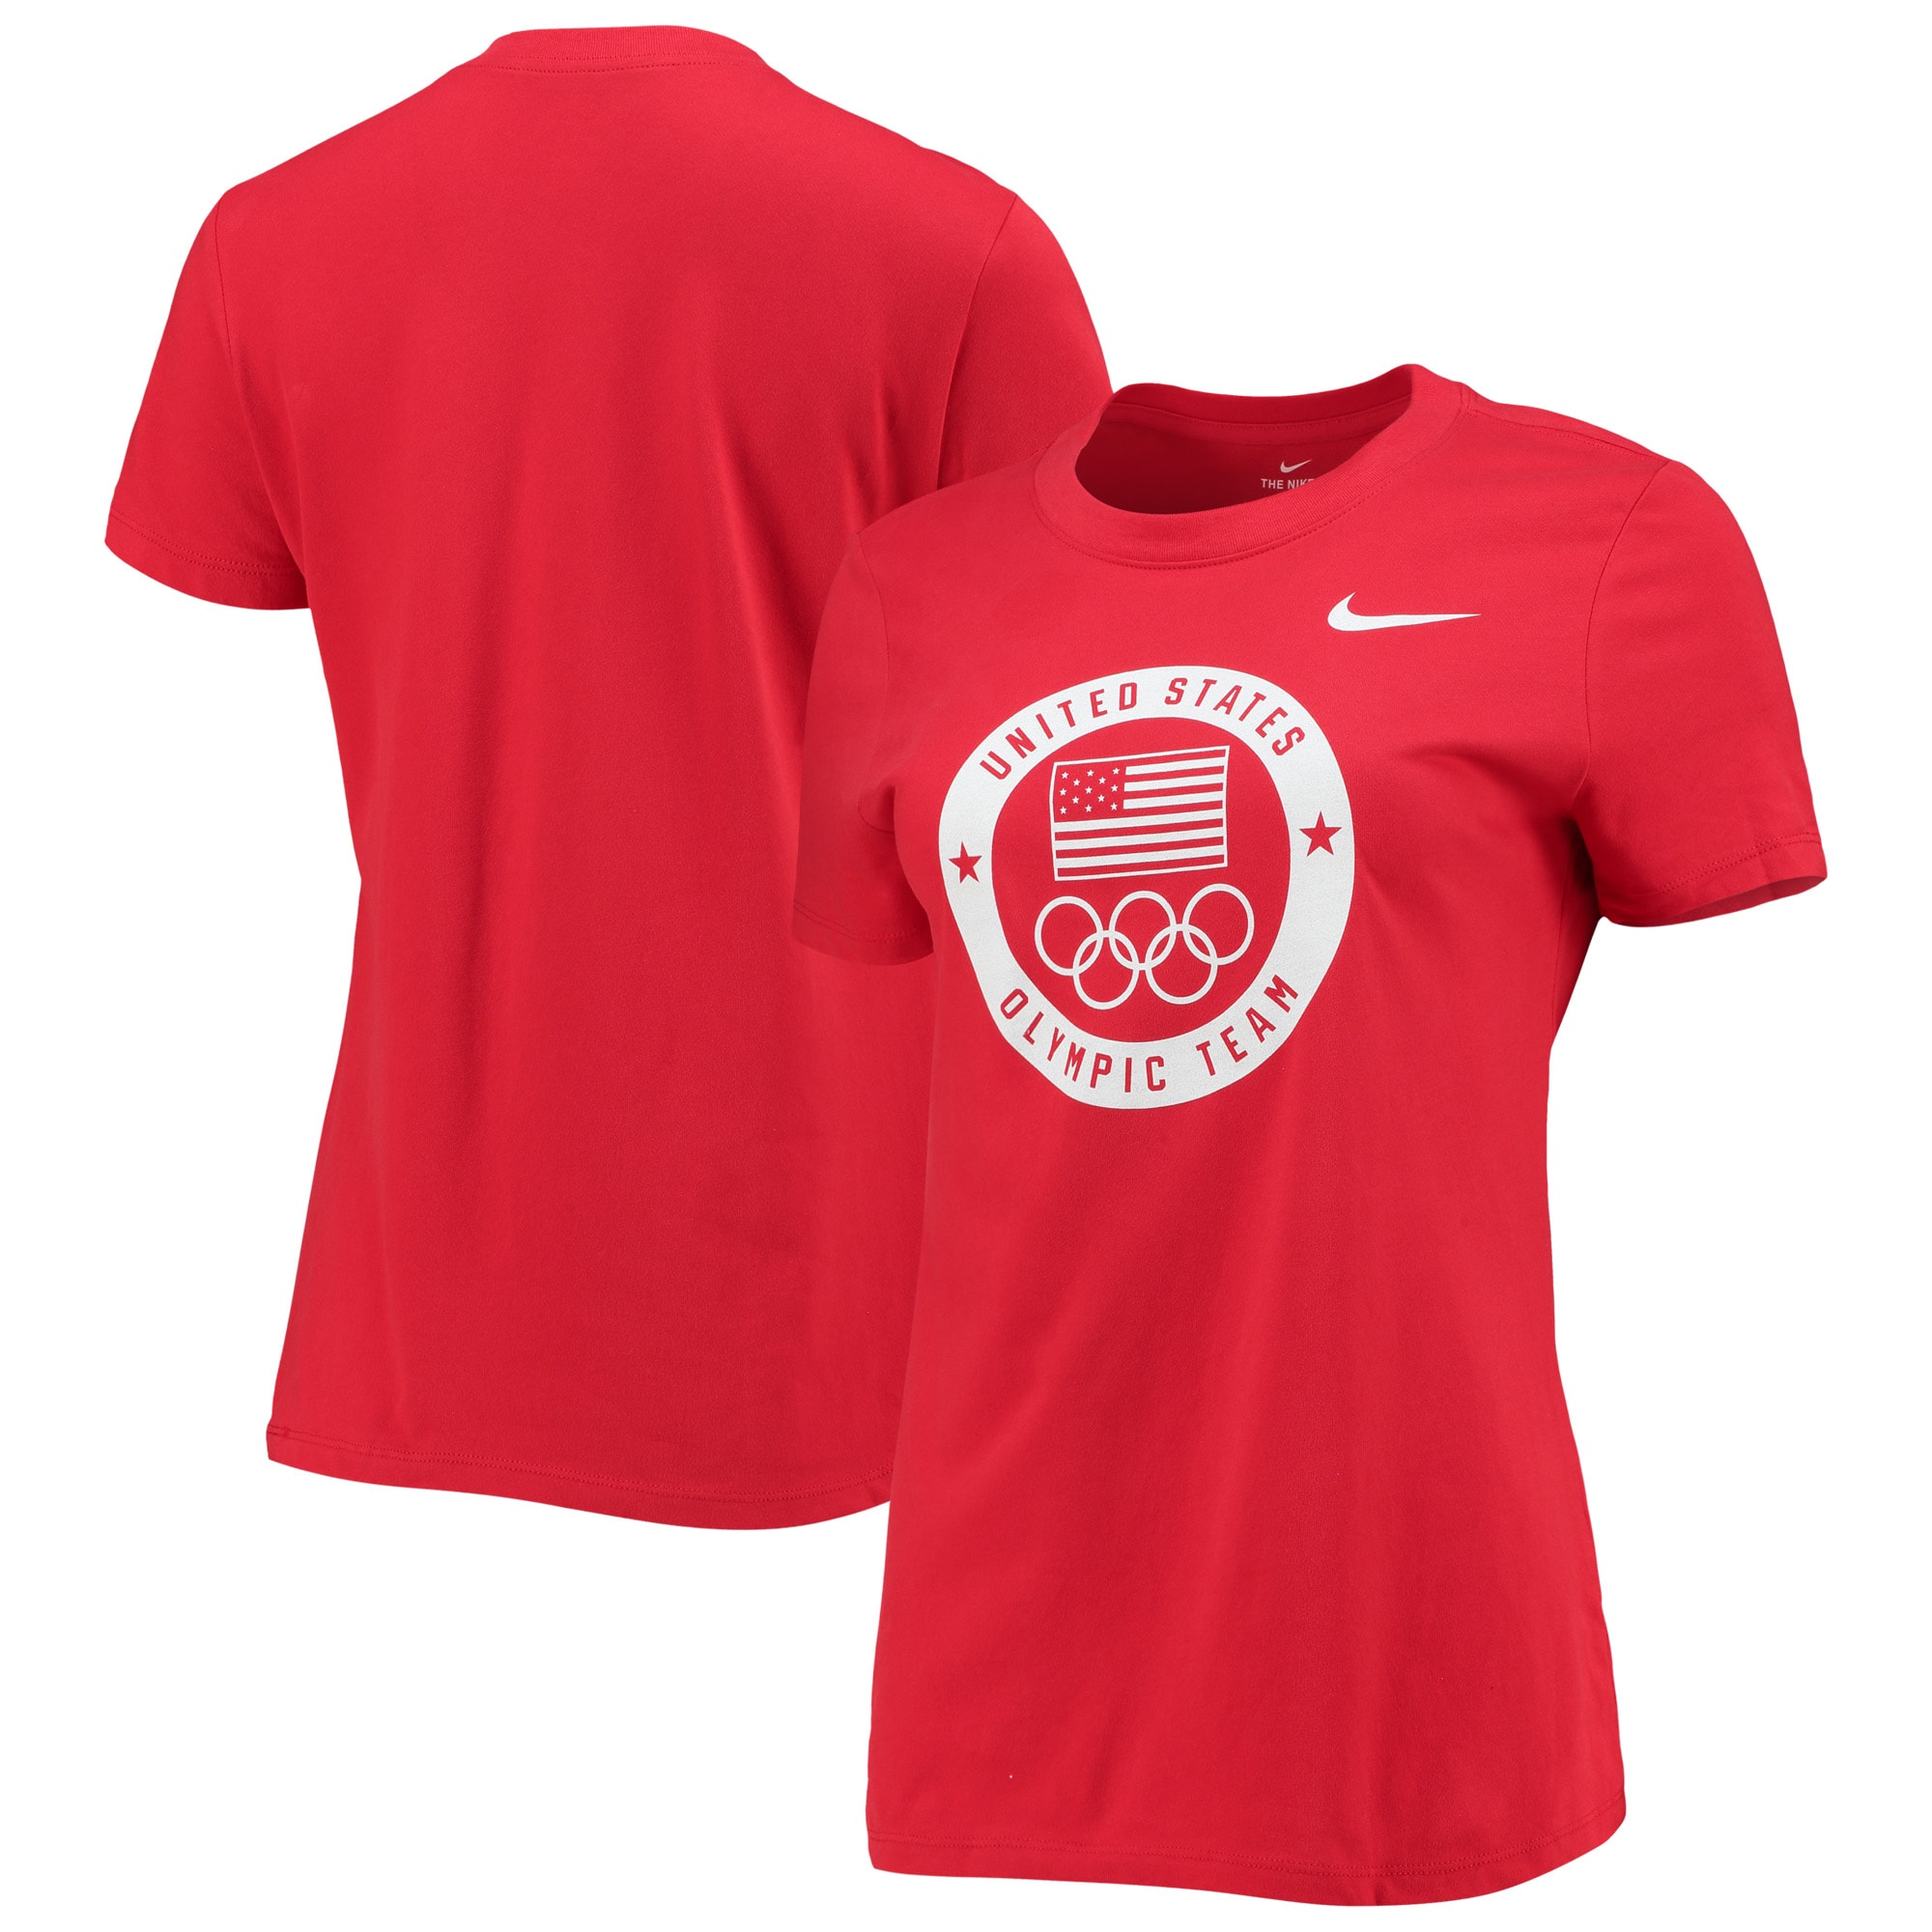 Women's Nike Red Team USA Performance T-Shirt - image 1 of 3